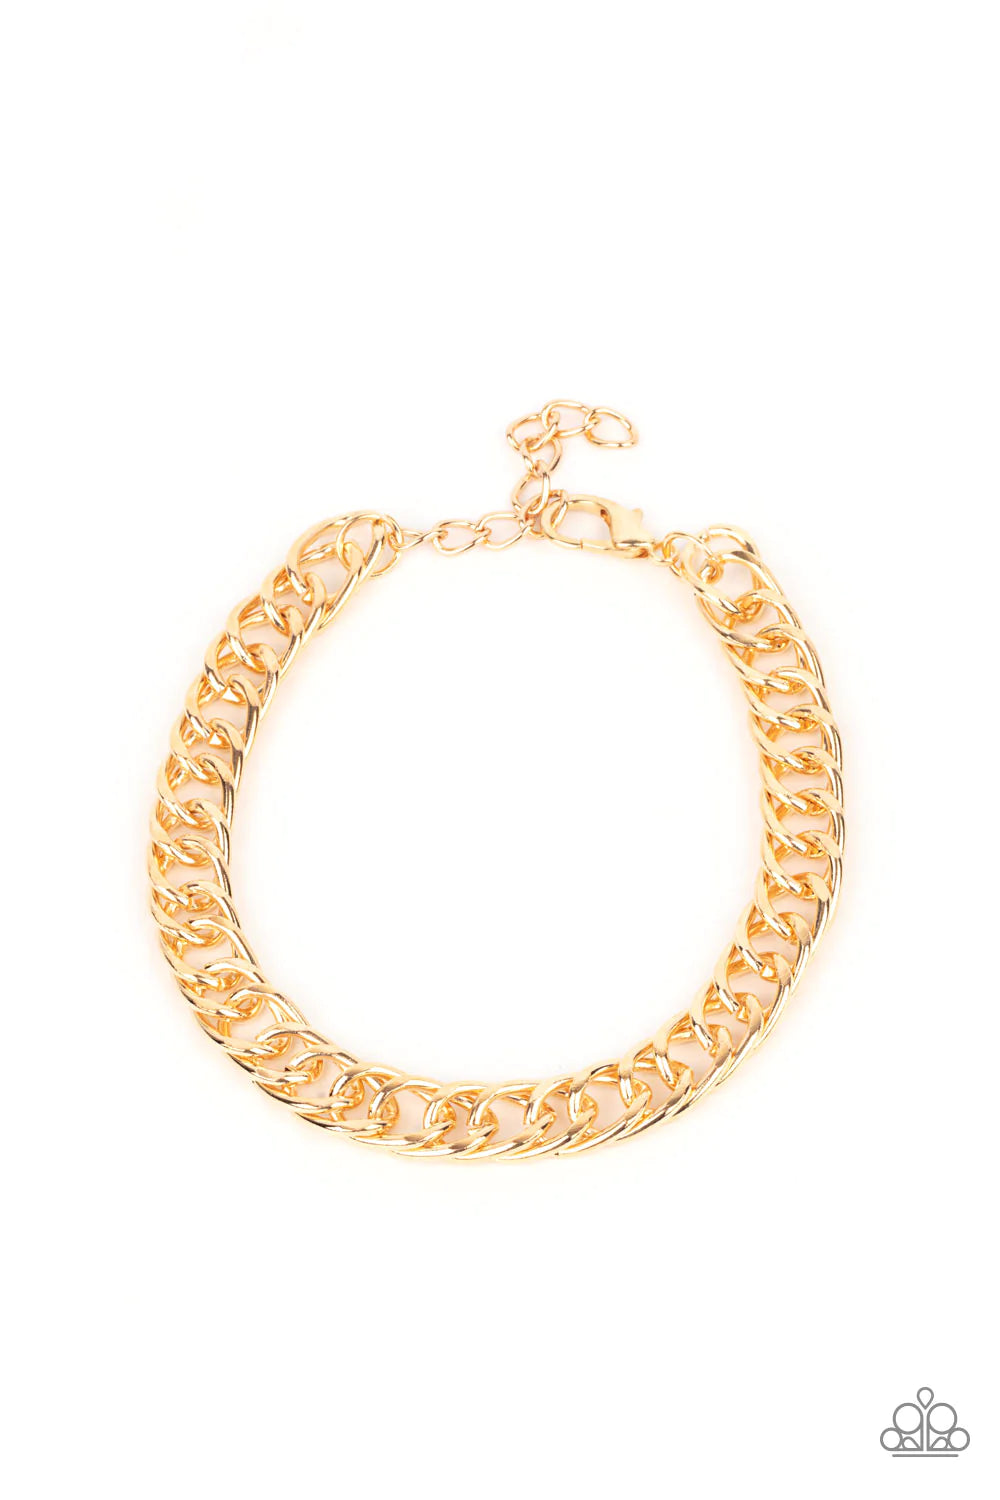 Paparazzi Accessories Game-Changing Couture - Gold Featuring oversized oval links, a shiny gold chain drapes around the wrist for a bold industrial look. Features an adjustable clasp closure. Sold as one individual bracelet. Jewelry